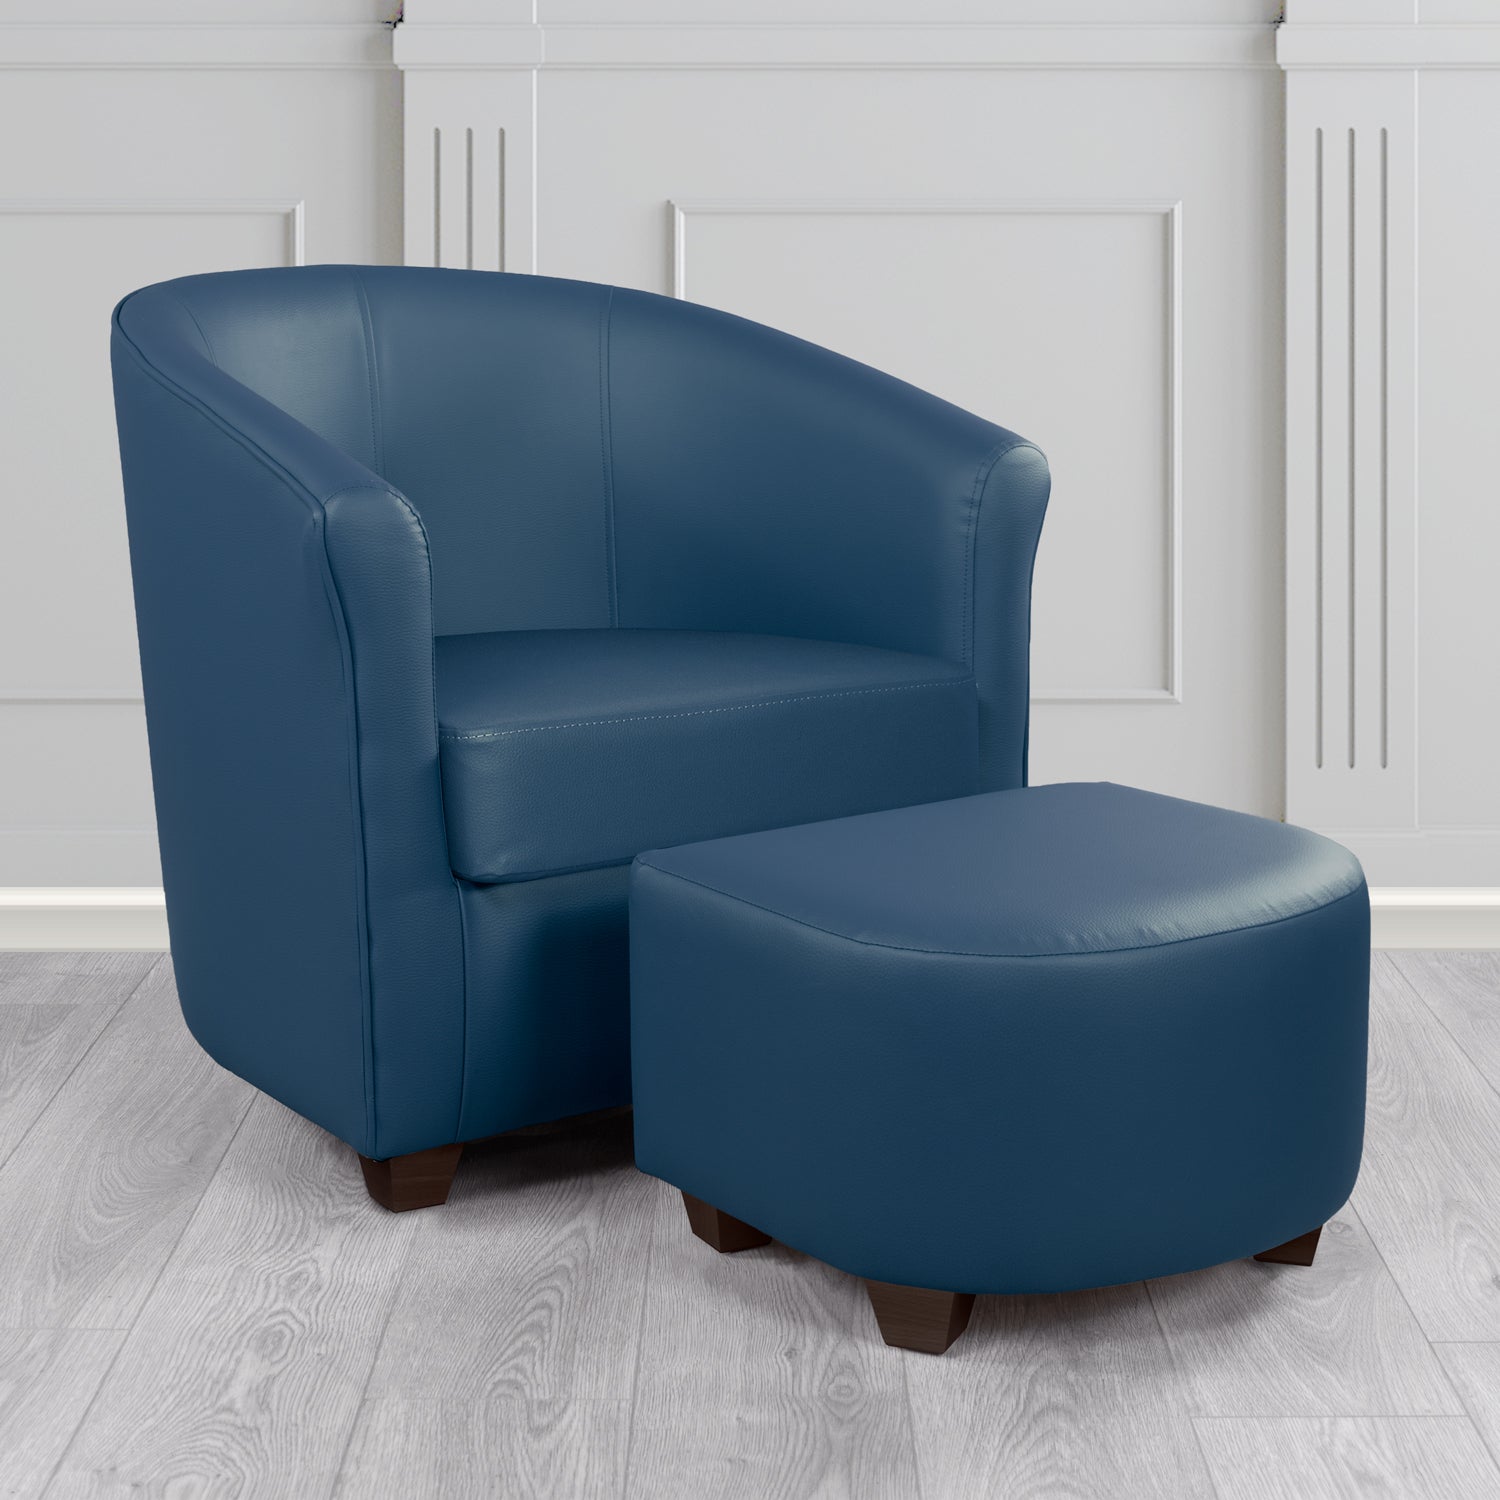 Cannes Tub Chair with Footstool Set in Just Colour Sapphire Blue Crib 5 Faux Leather - The Tub Chair Shop